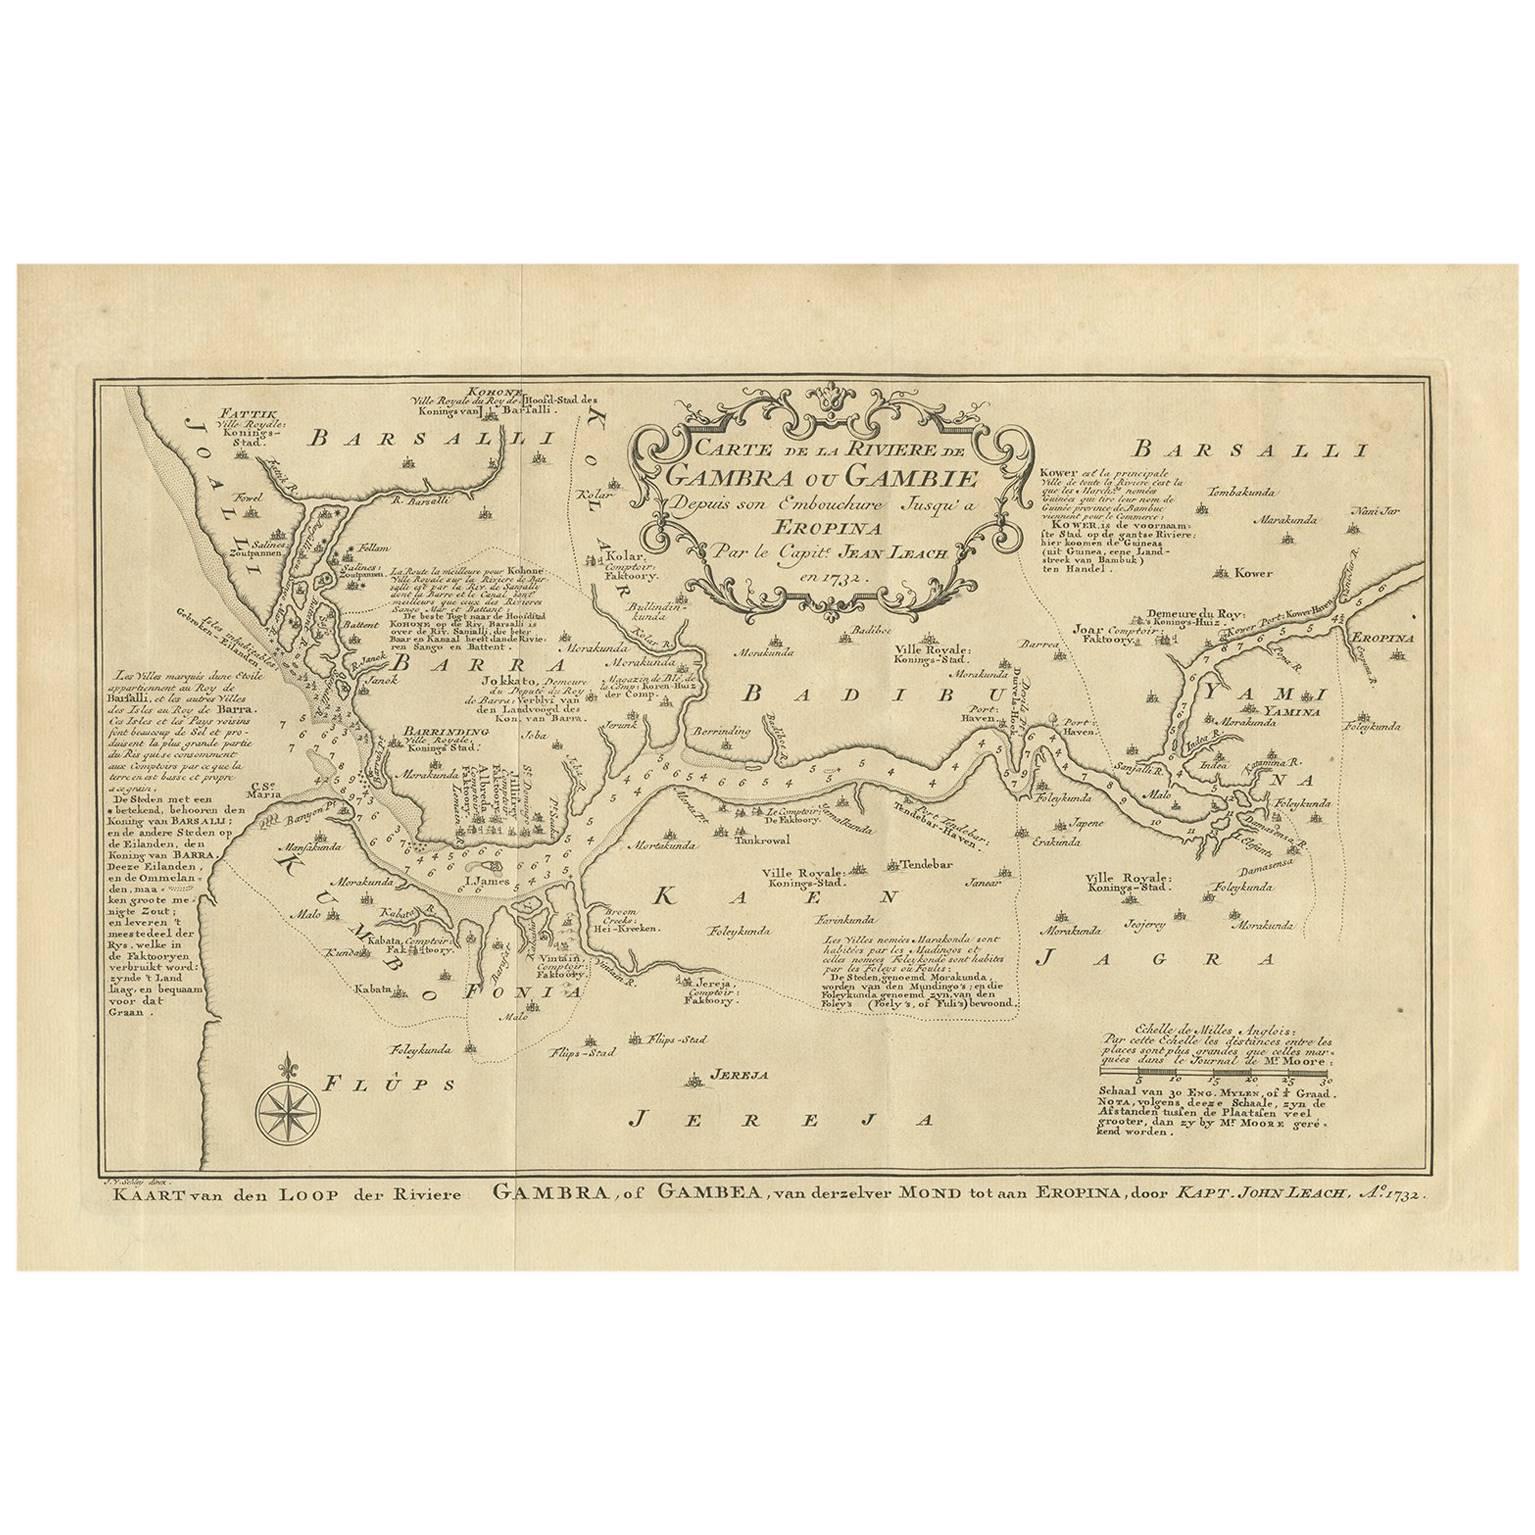 Antique Map of the Gambia River by J. Van Schley, circa 1750